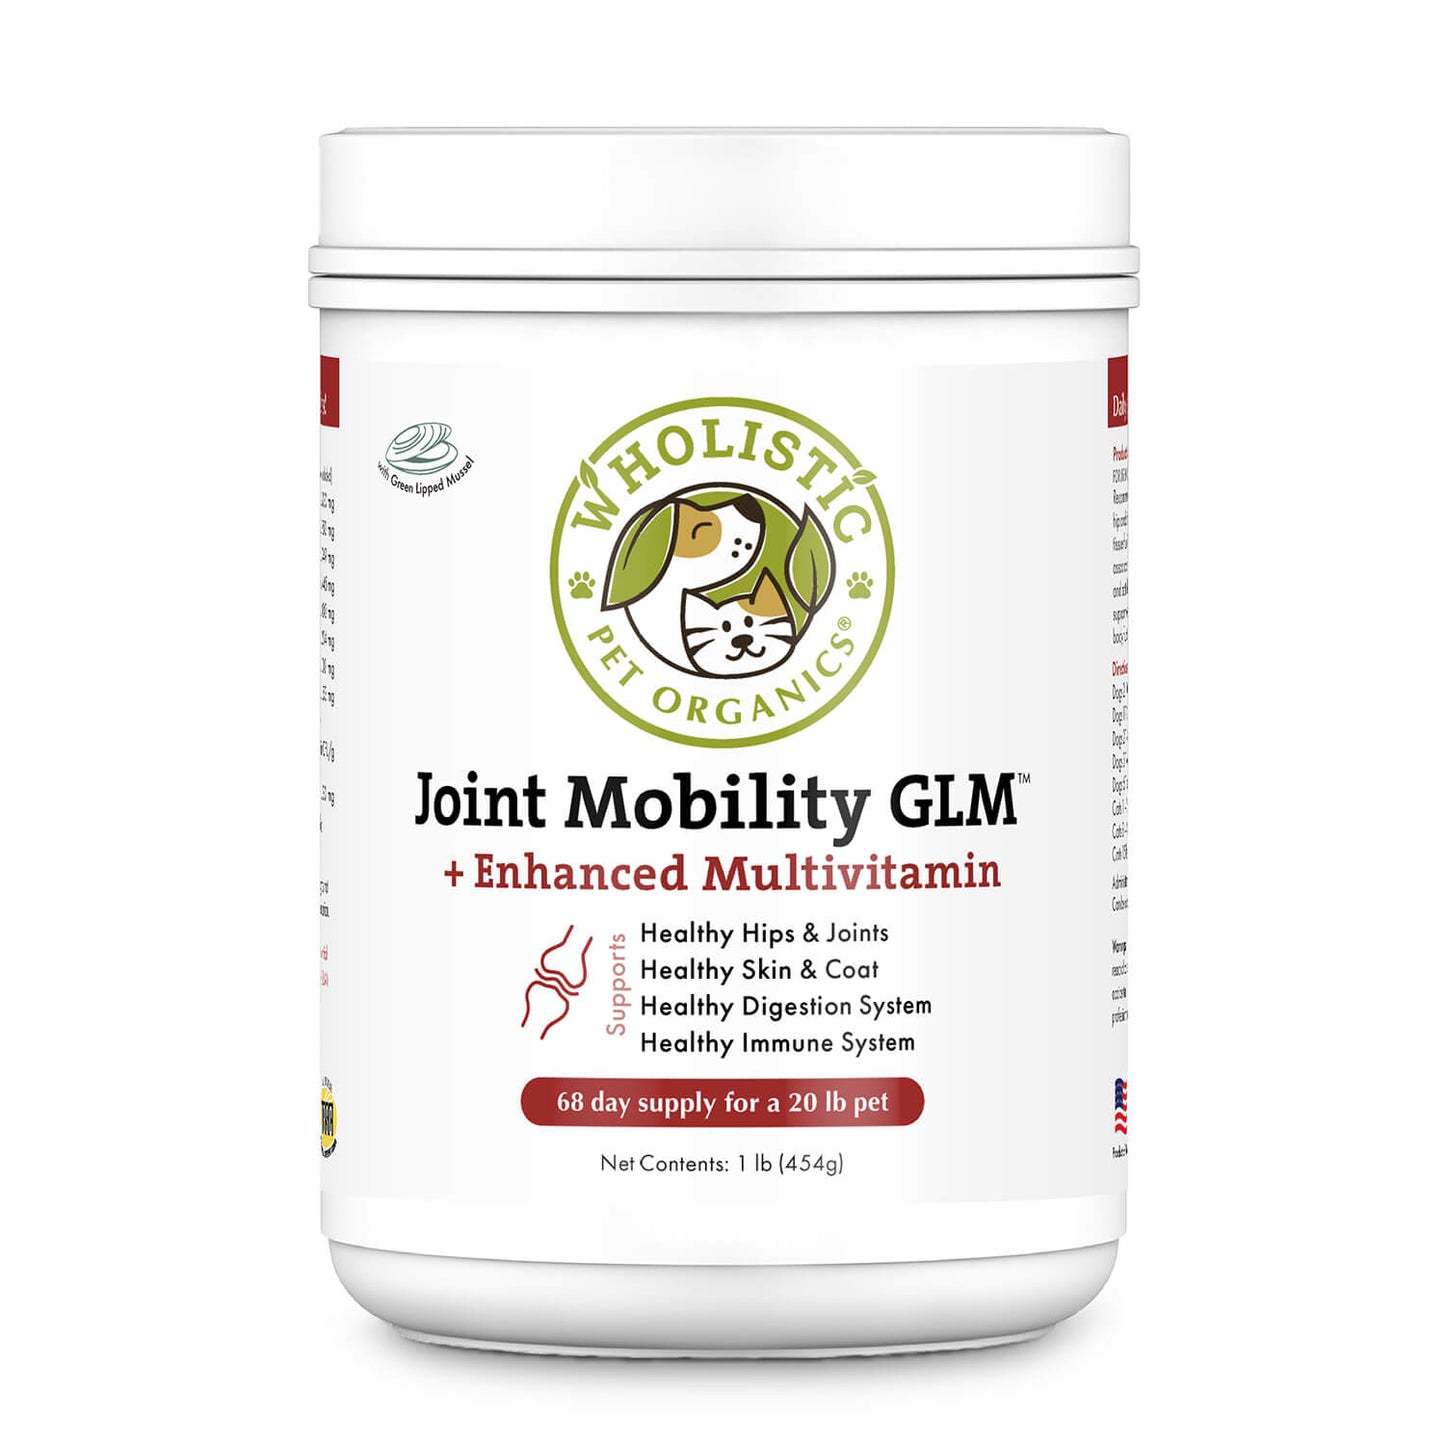 Joint Mobility GLM™